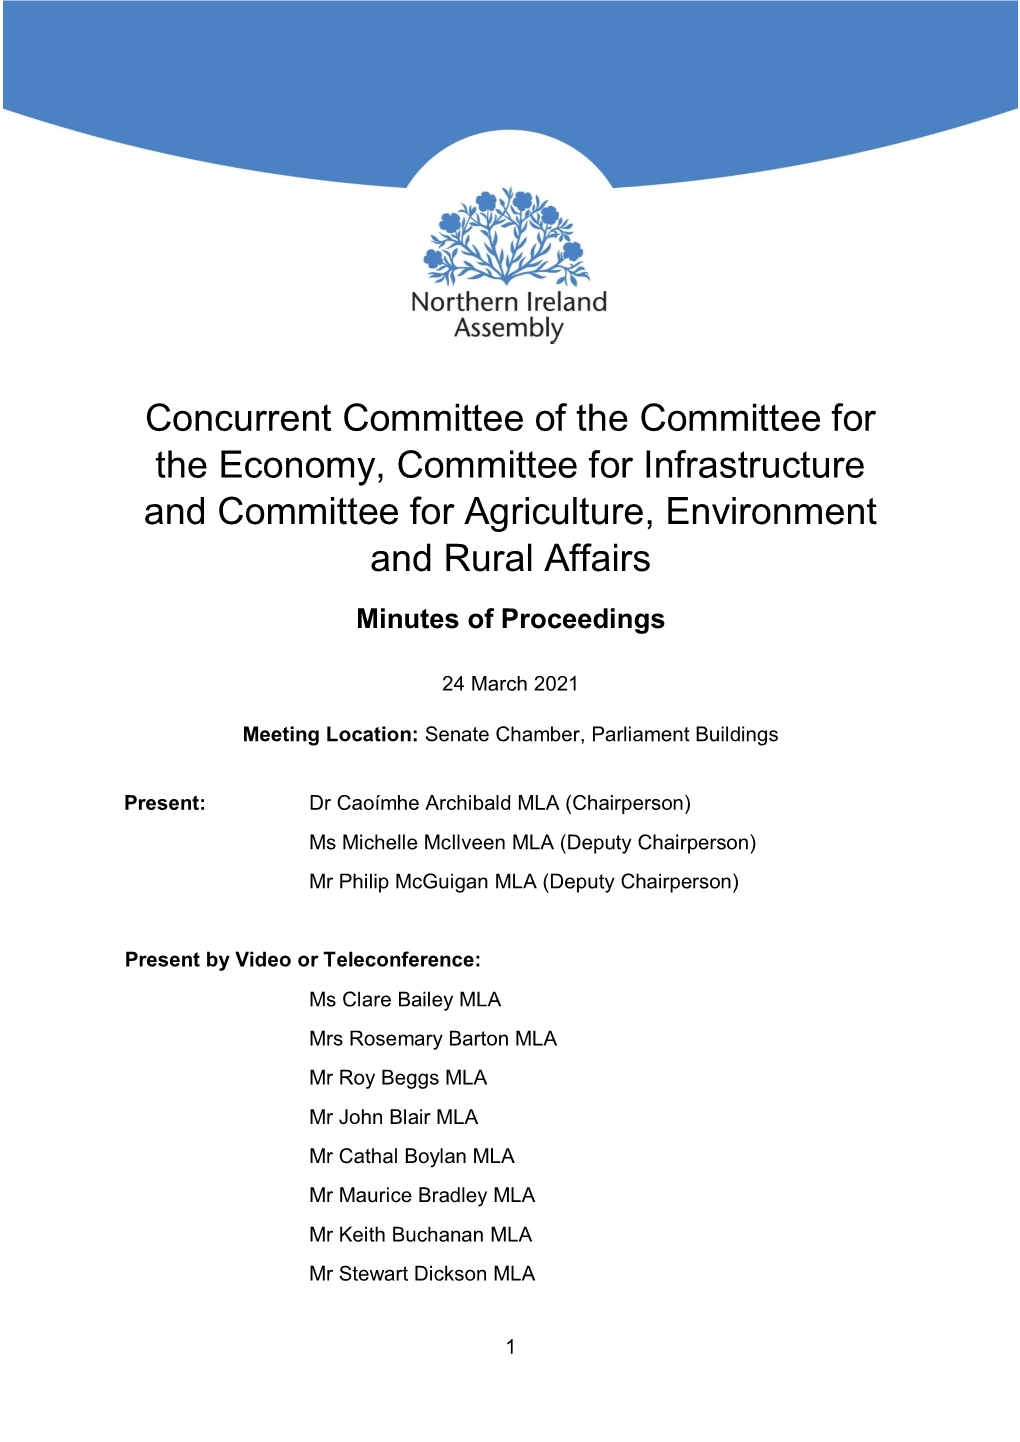 2021-03-24 Minutes of Concurrent Meeting.Pdf